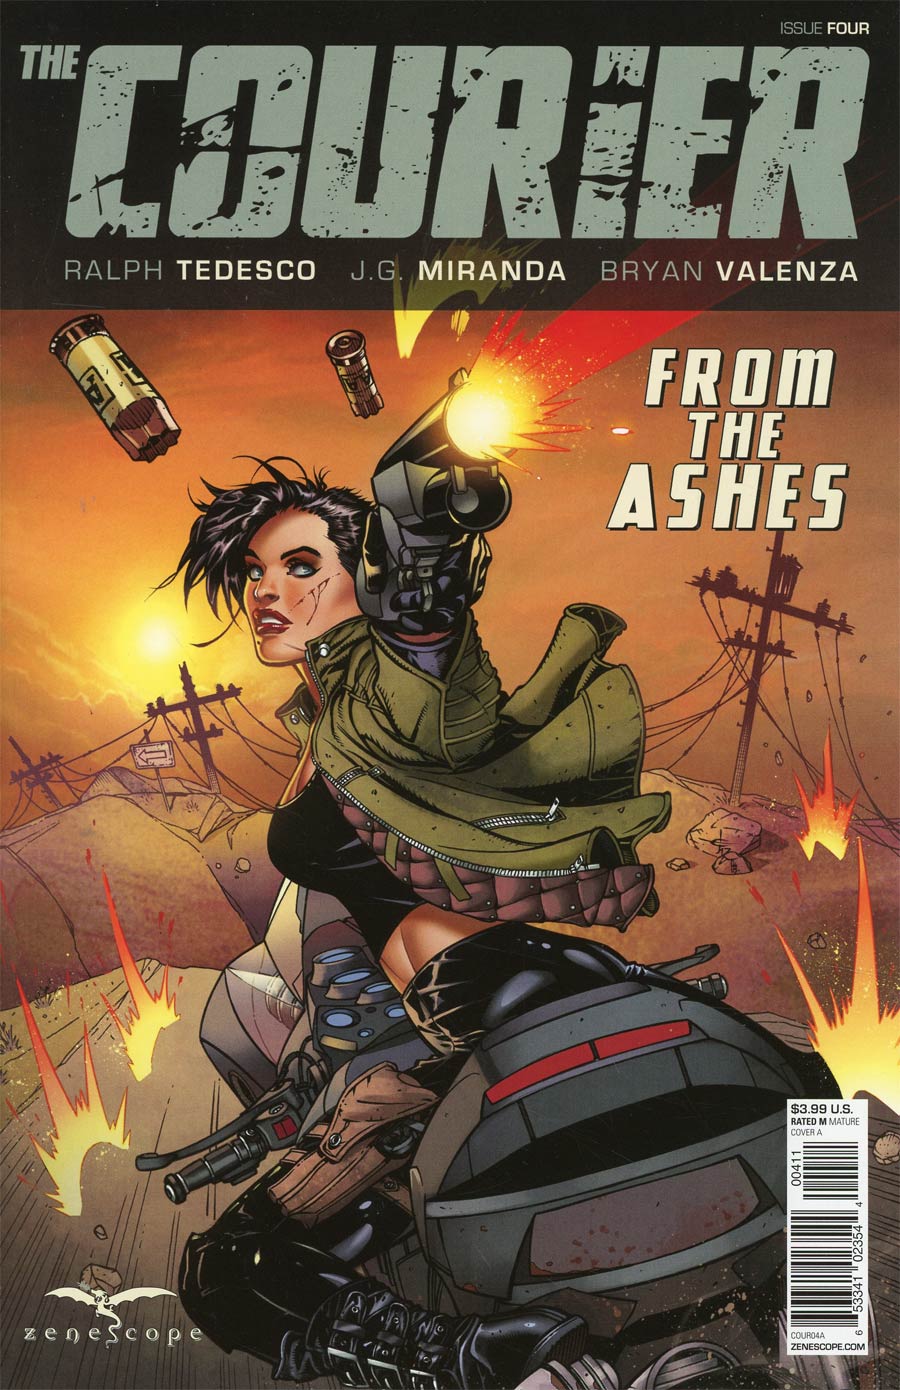 Courier From The Ashes #4 Cover A Drew Edward Johnson